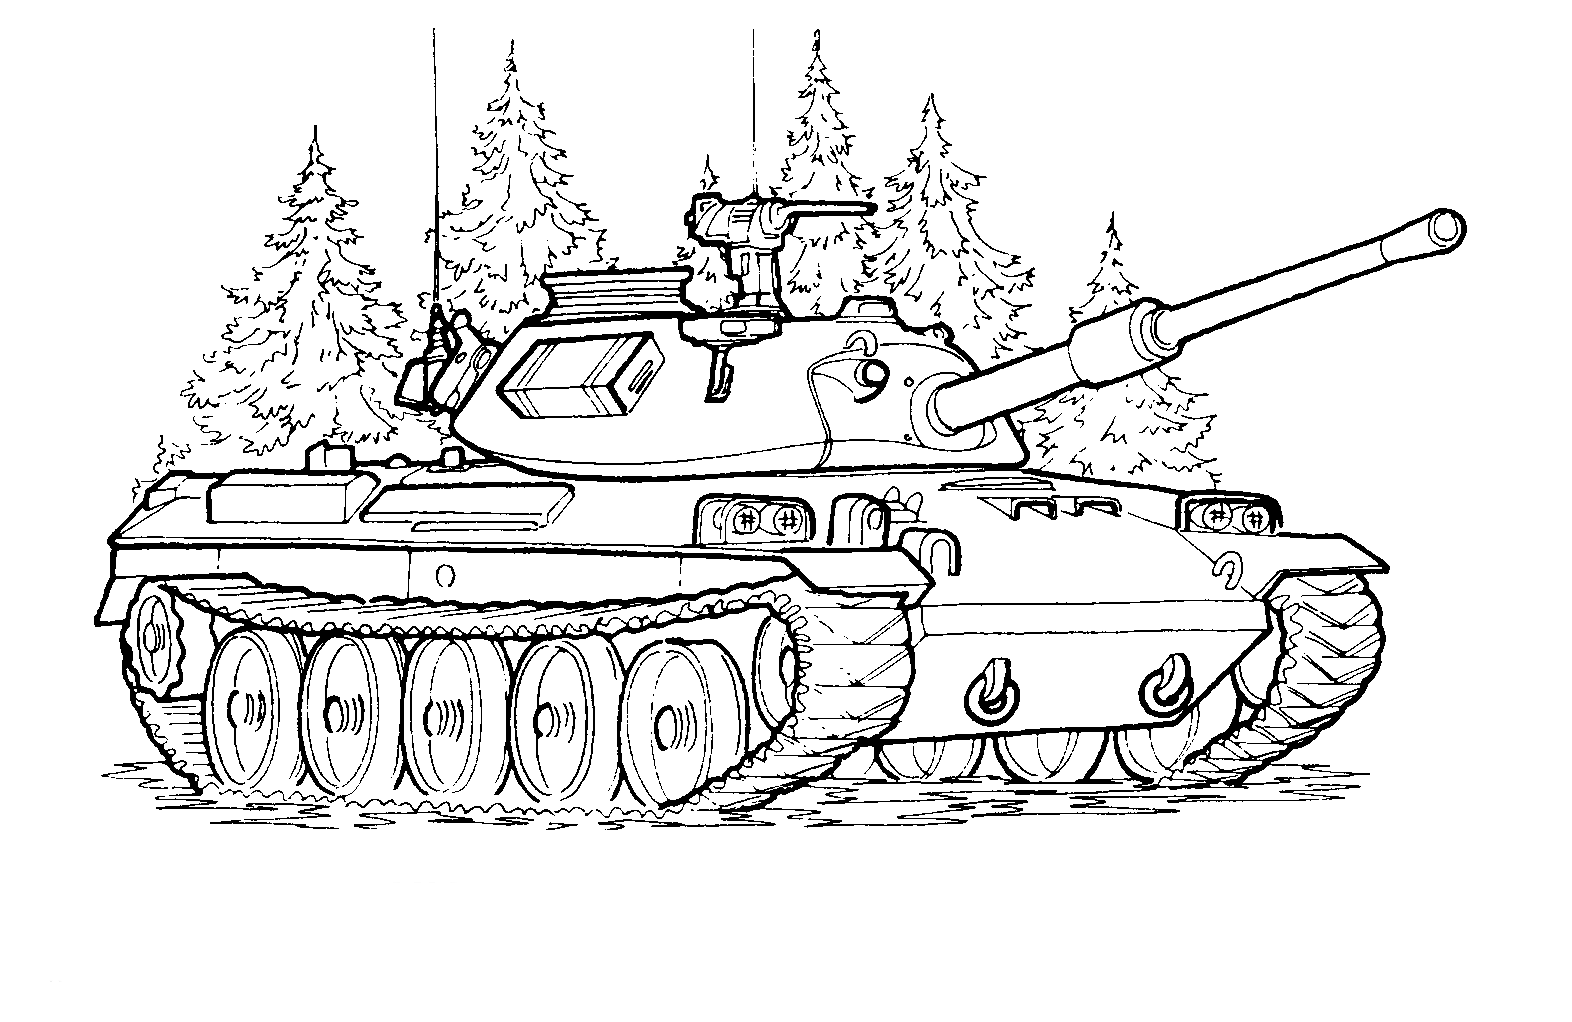 Coloring page - Japanese tank